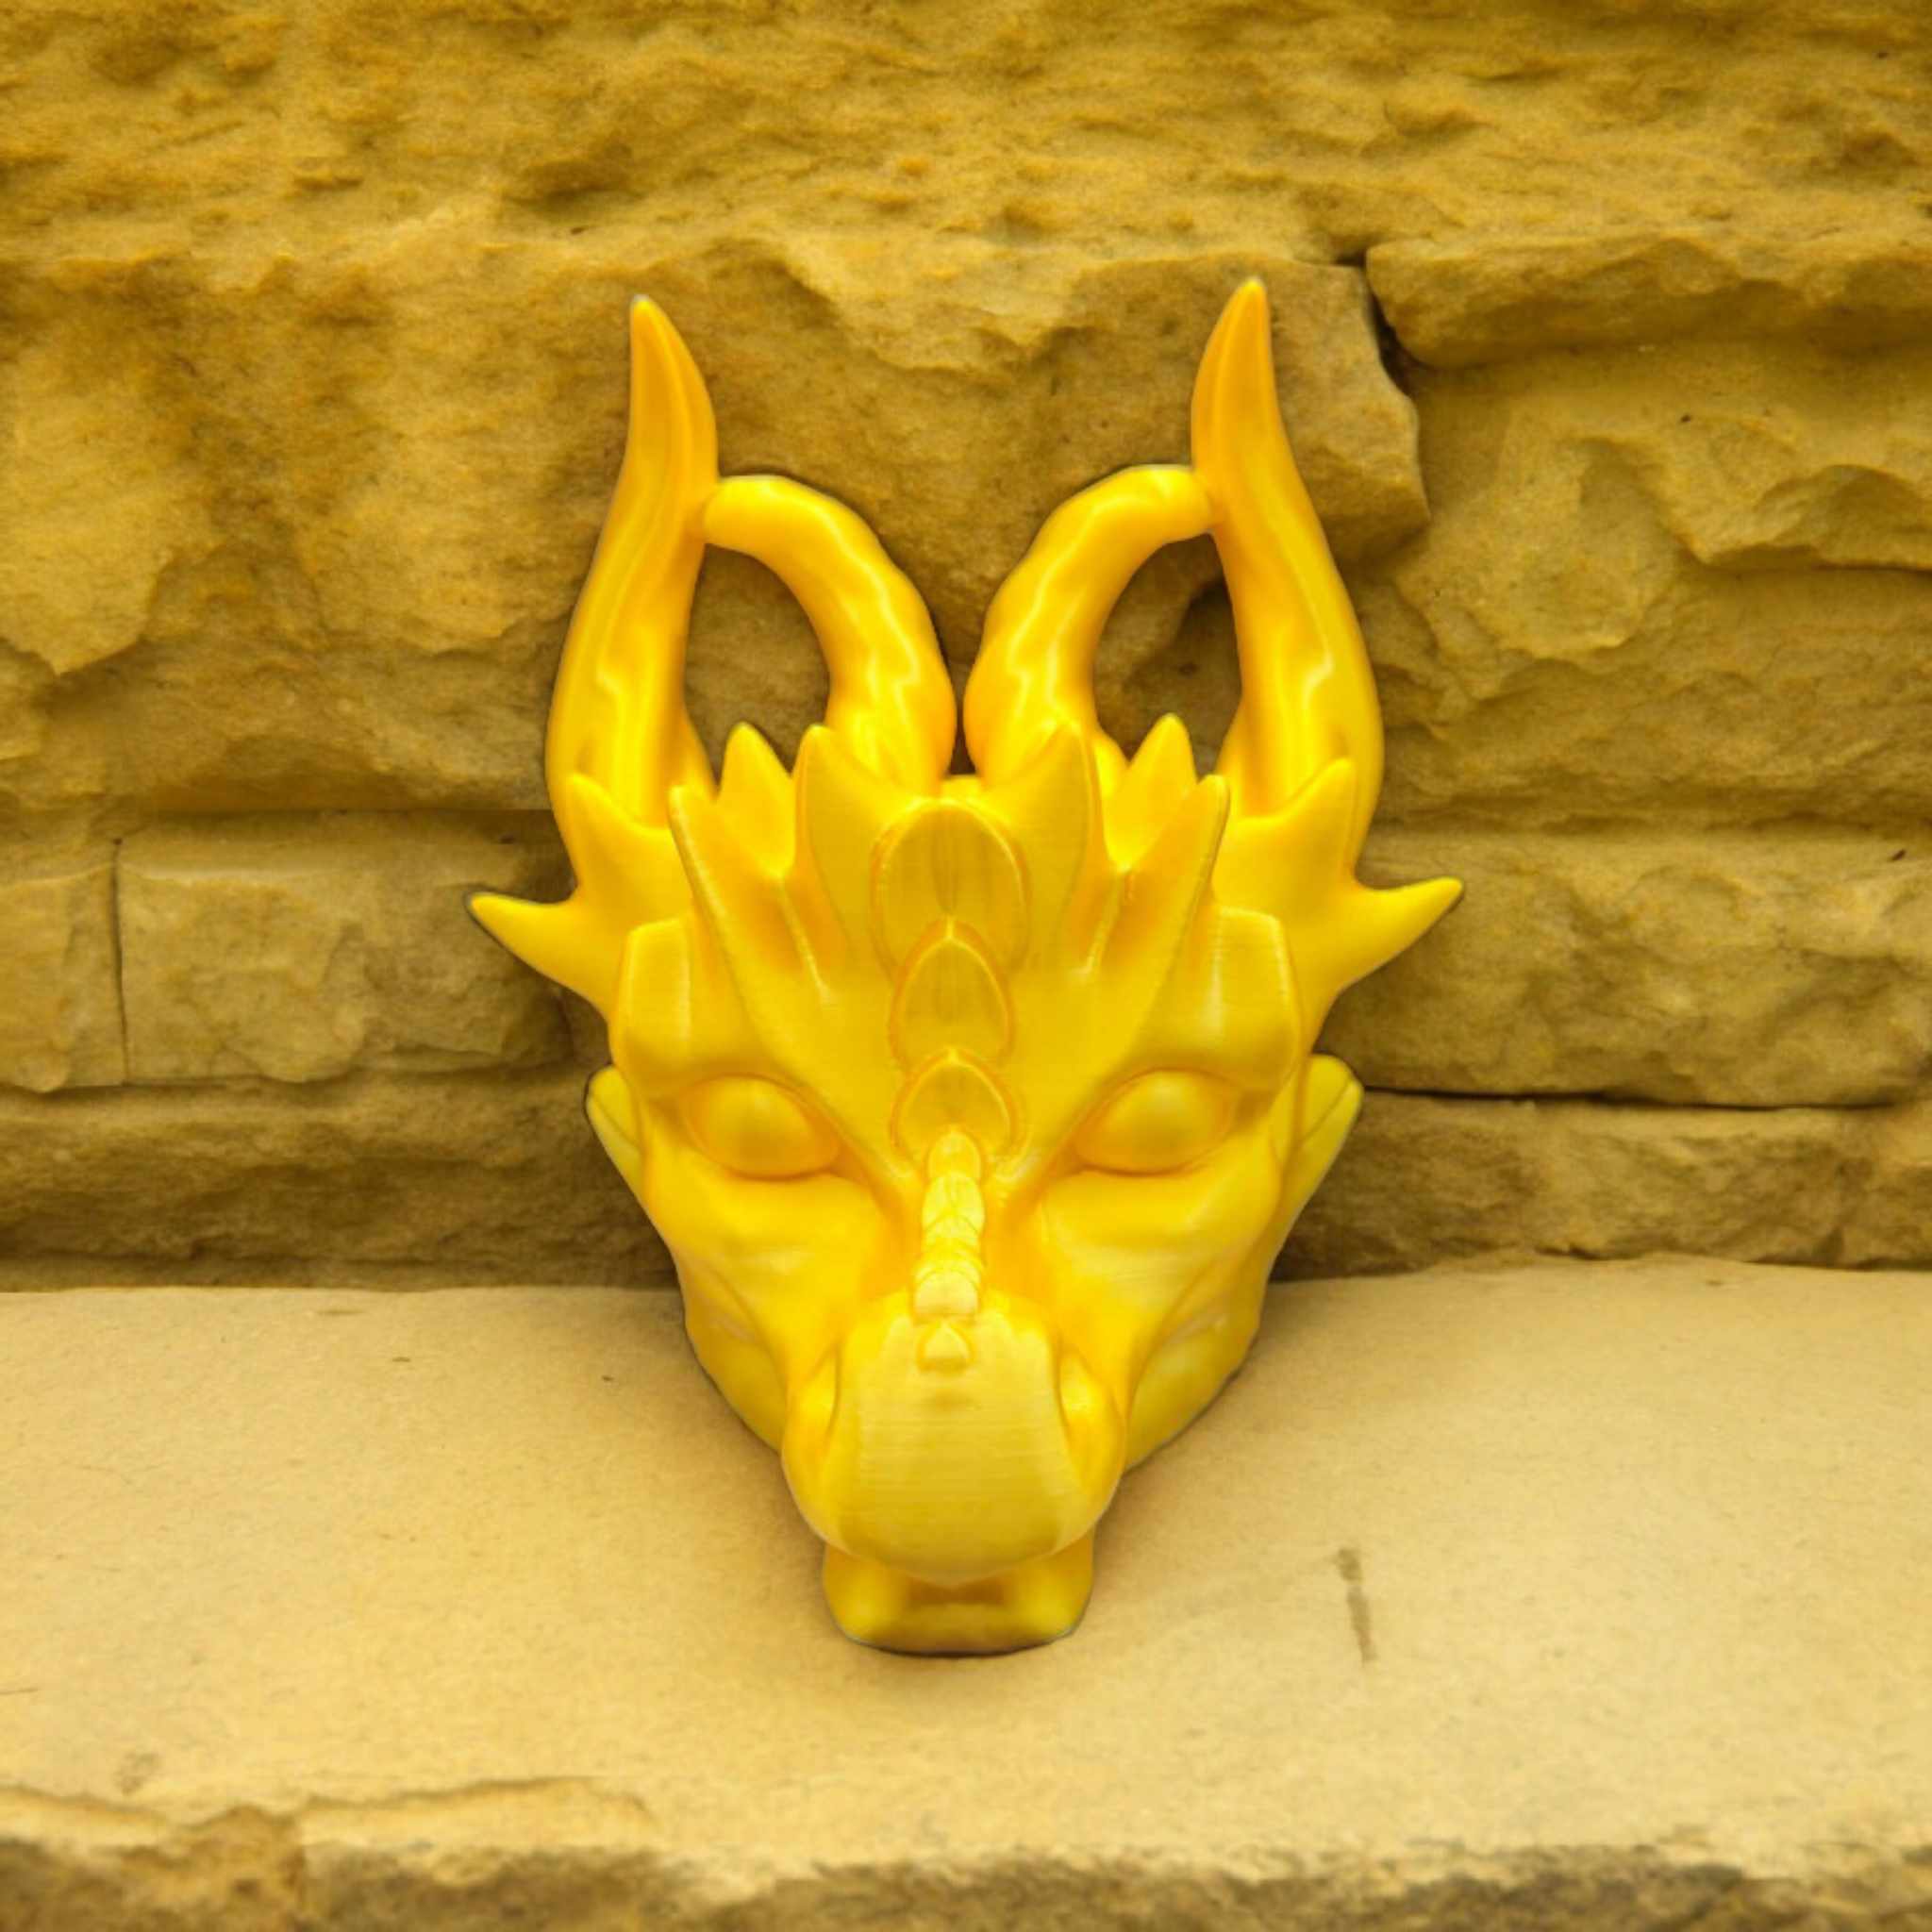 3D Printed Dragon Glasses Holder, Unique Eyewear Stand, Fantasy Desk Organizer, Perfect Geeky Gift